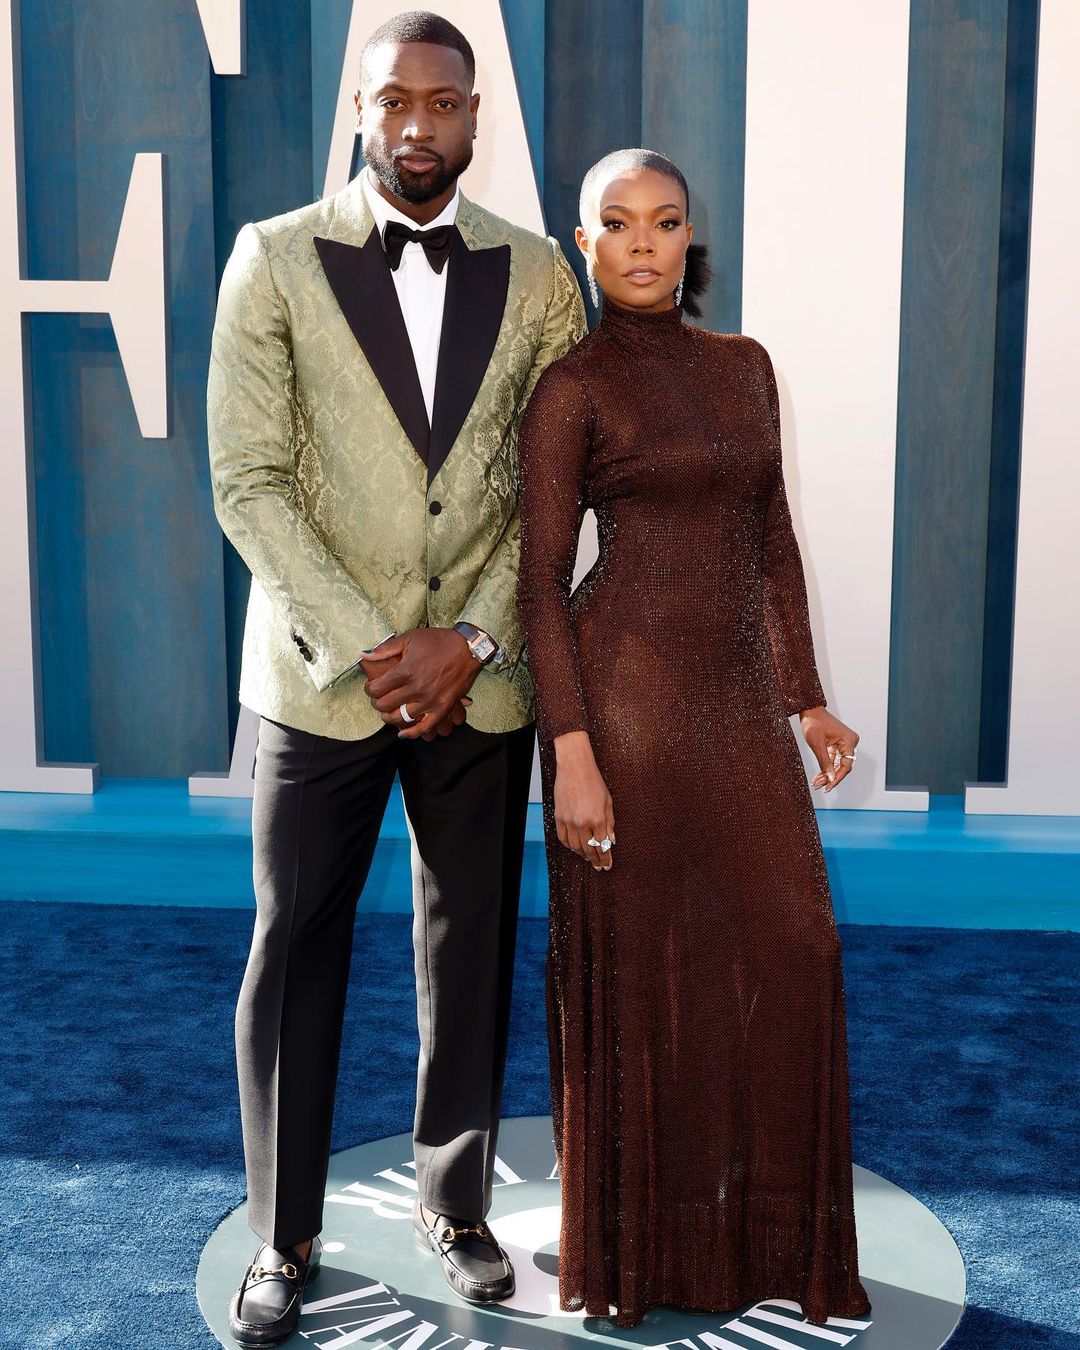 Gabrielle Union and Dwyane Wade stepped out in style